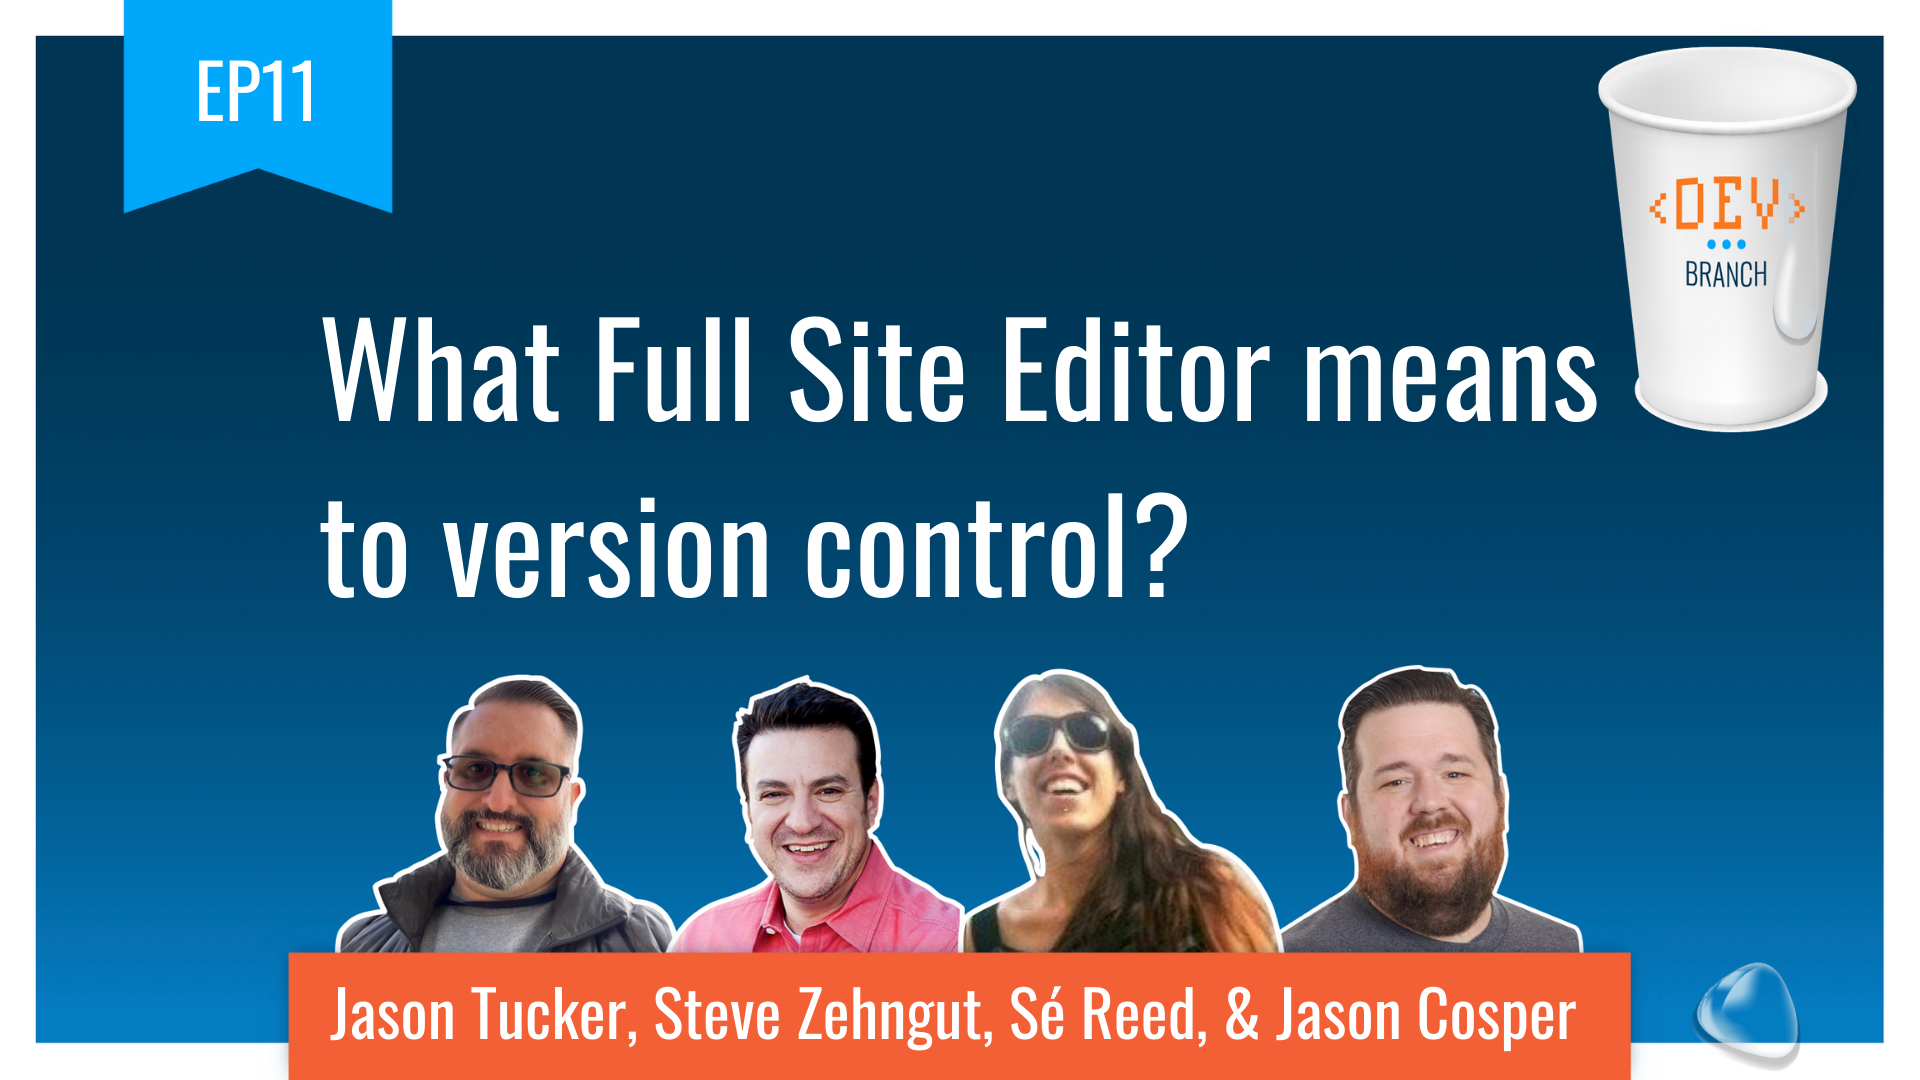 EP11 – What Full Site Editor means to version control?